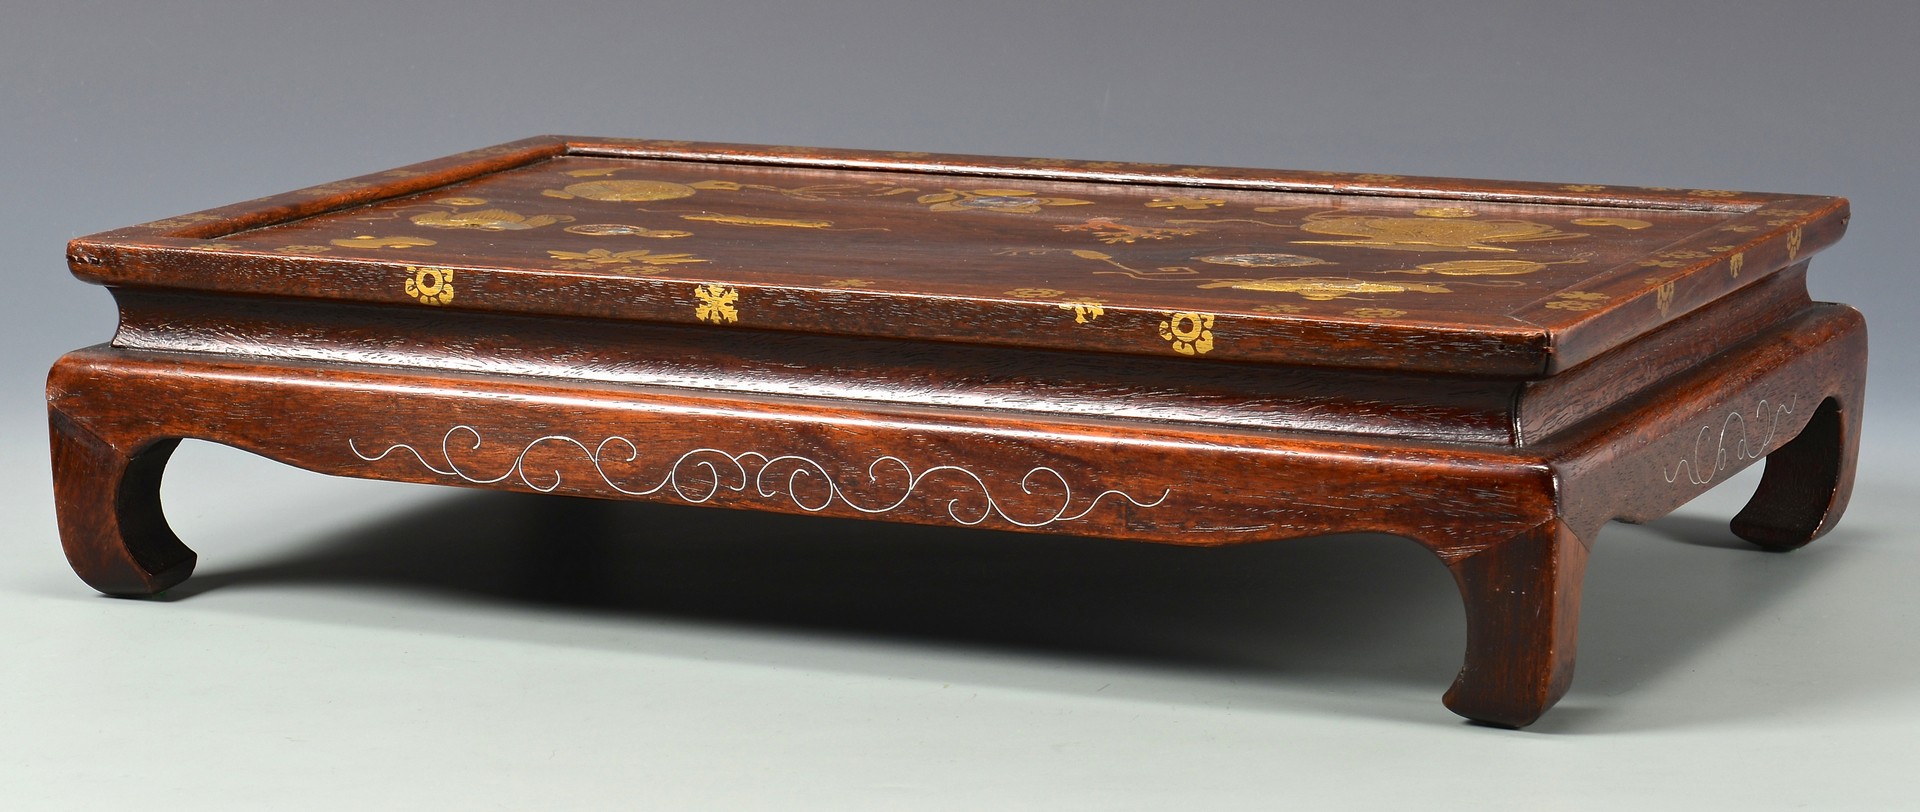 Lot 380: Japanese Lacquered Inlaid Table Tray